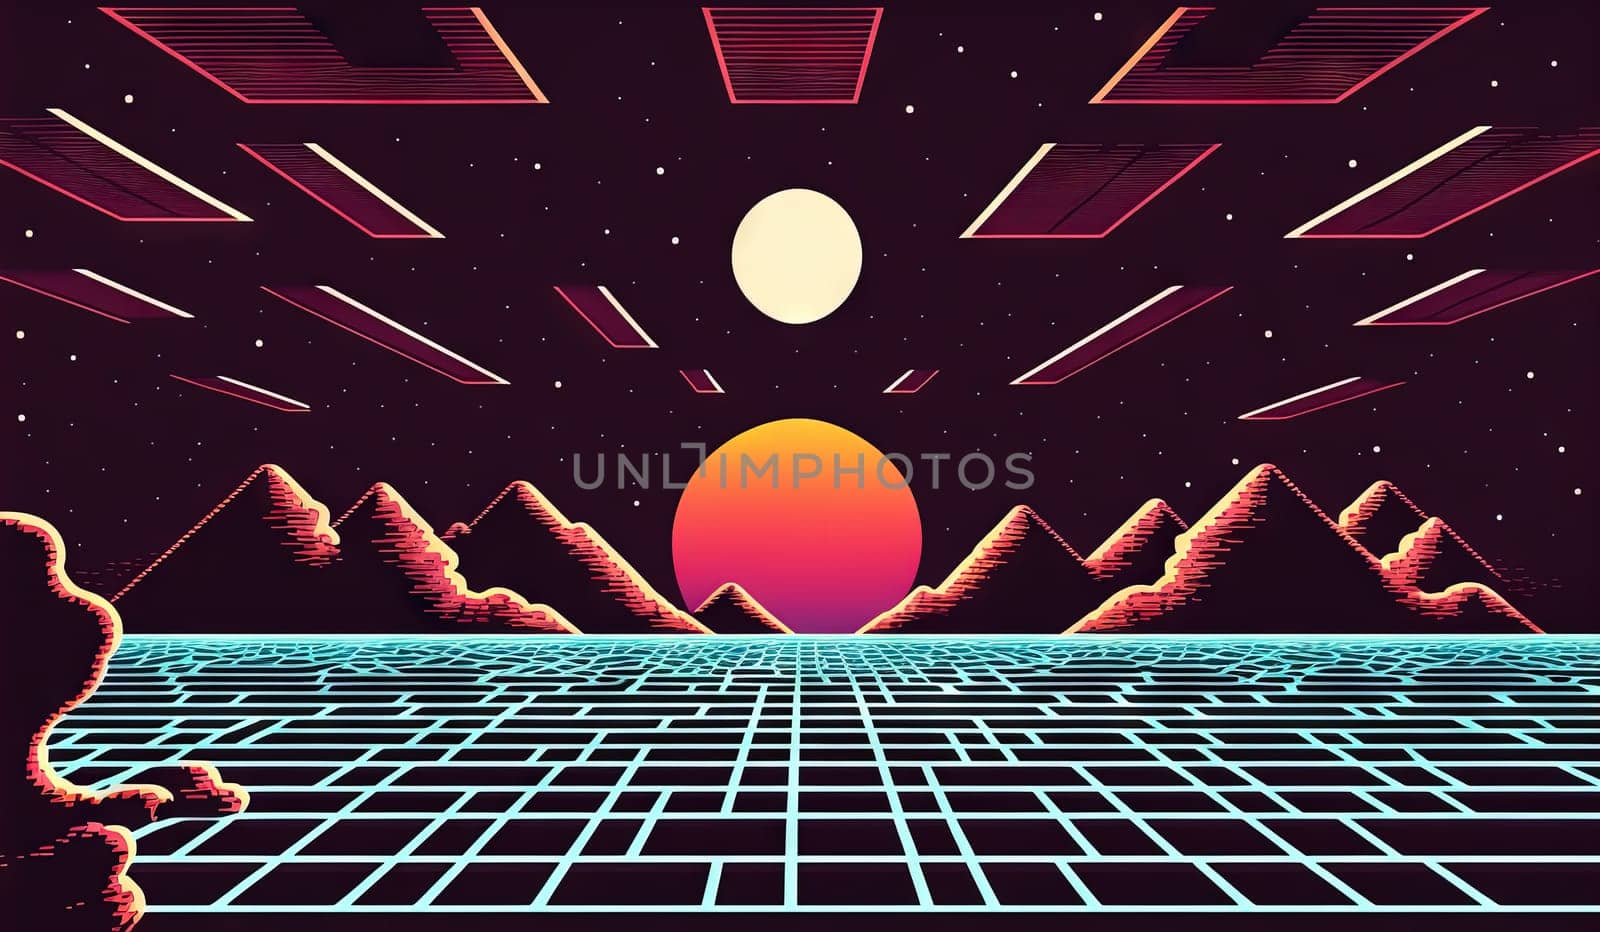 Retro styled sci-fi landscape with mountains. Retro futuristic science fiction illustration in drawing style with alien sun. Generated AI